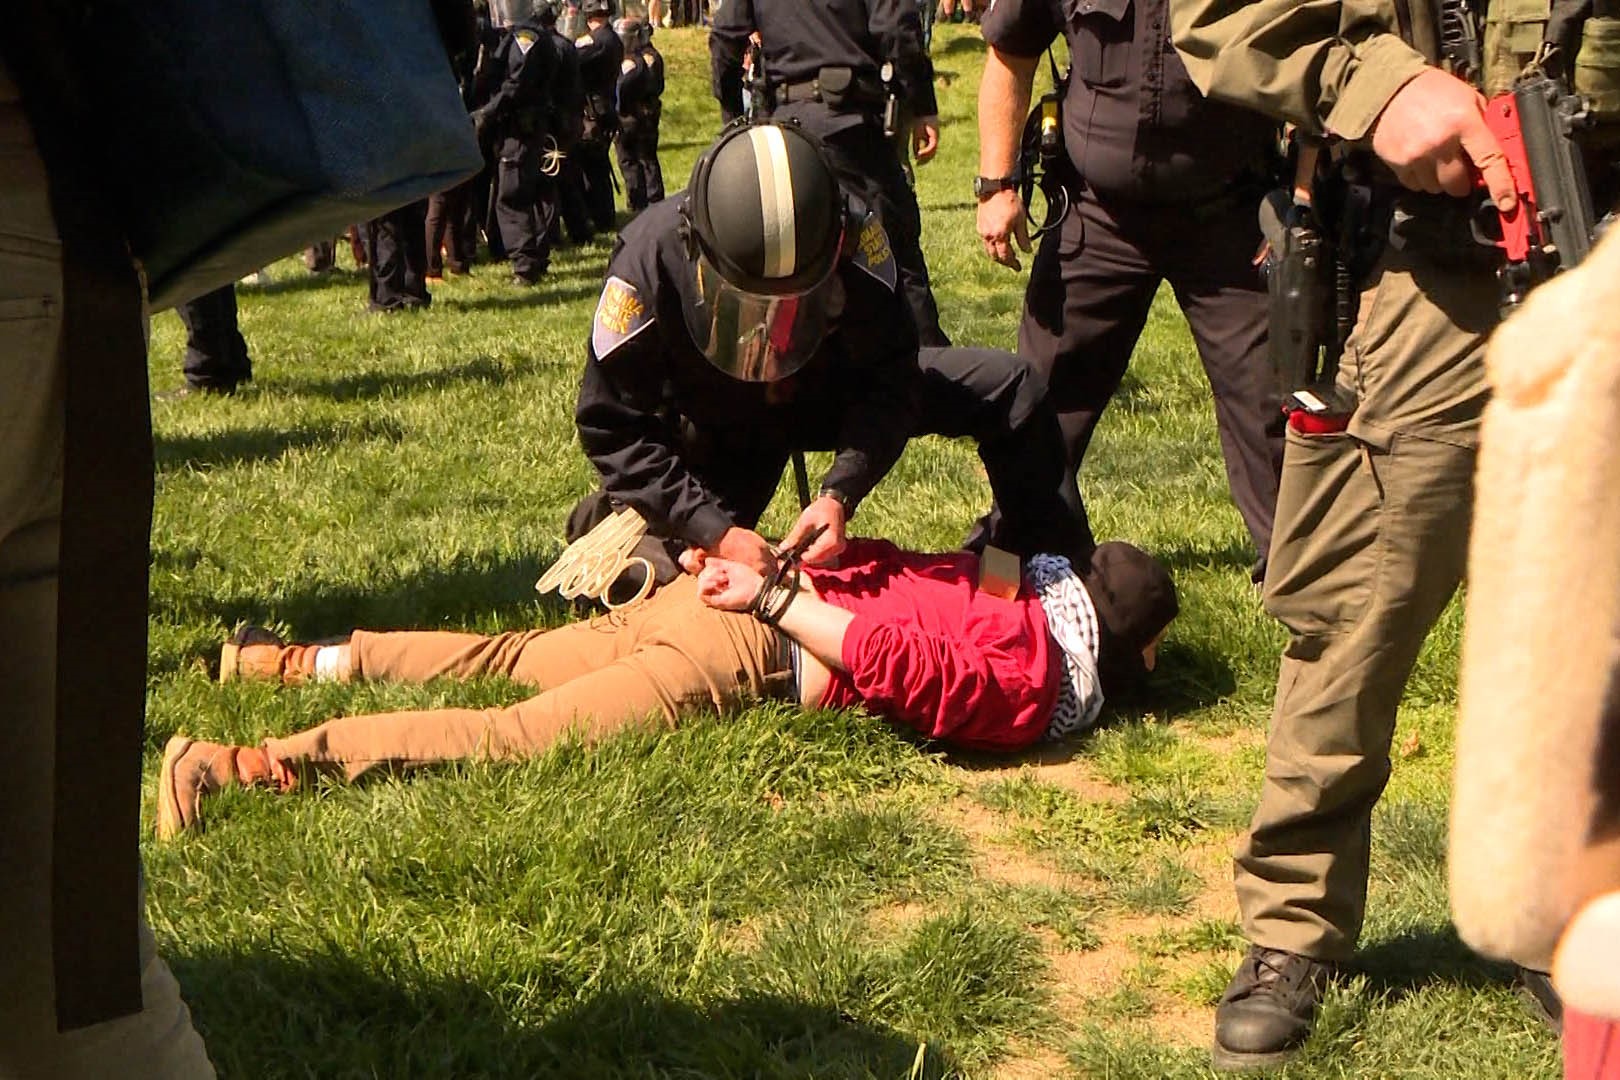 IU protester arrest in Dunn Meadow